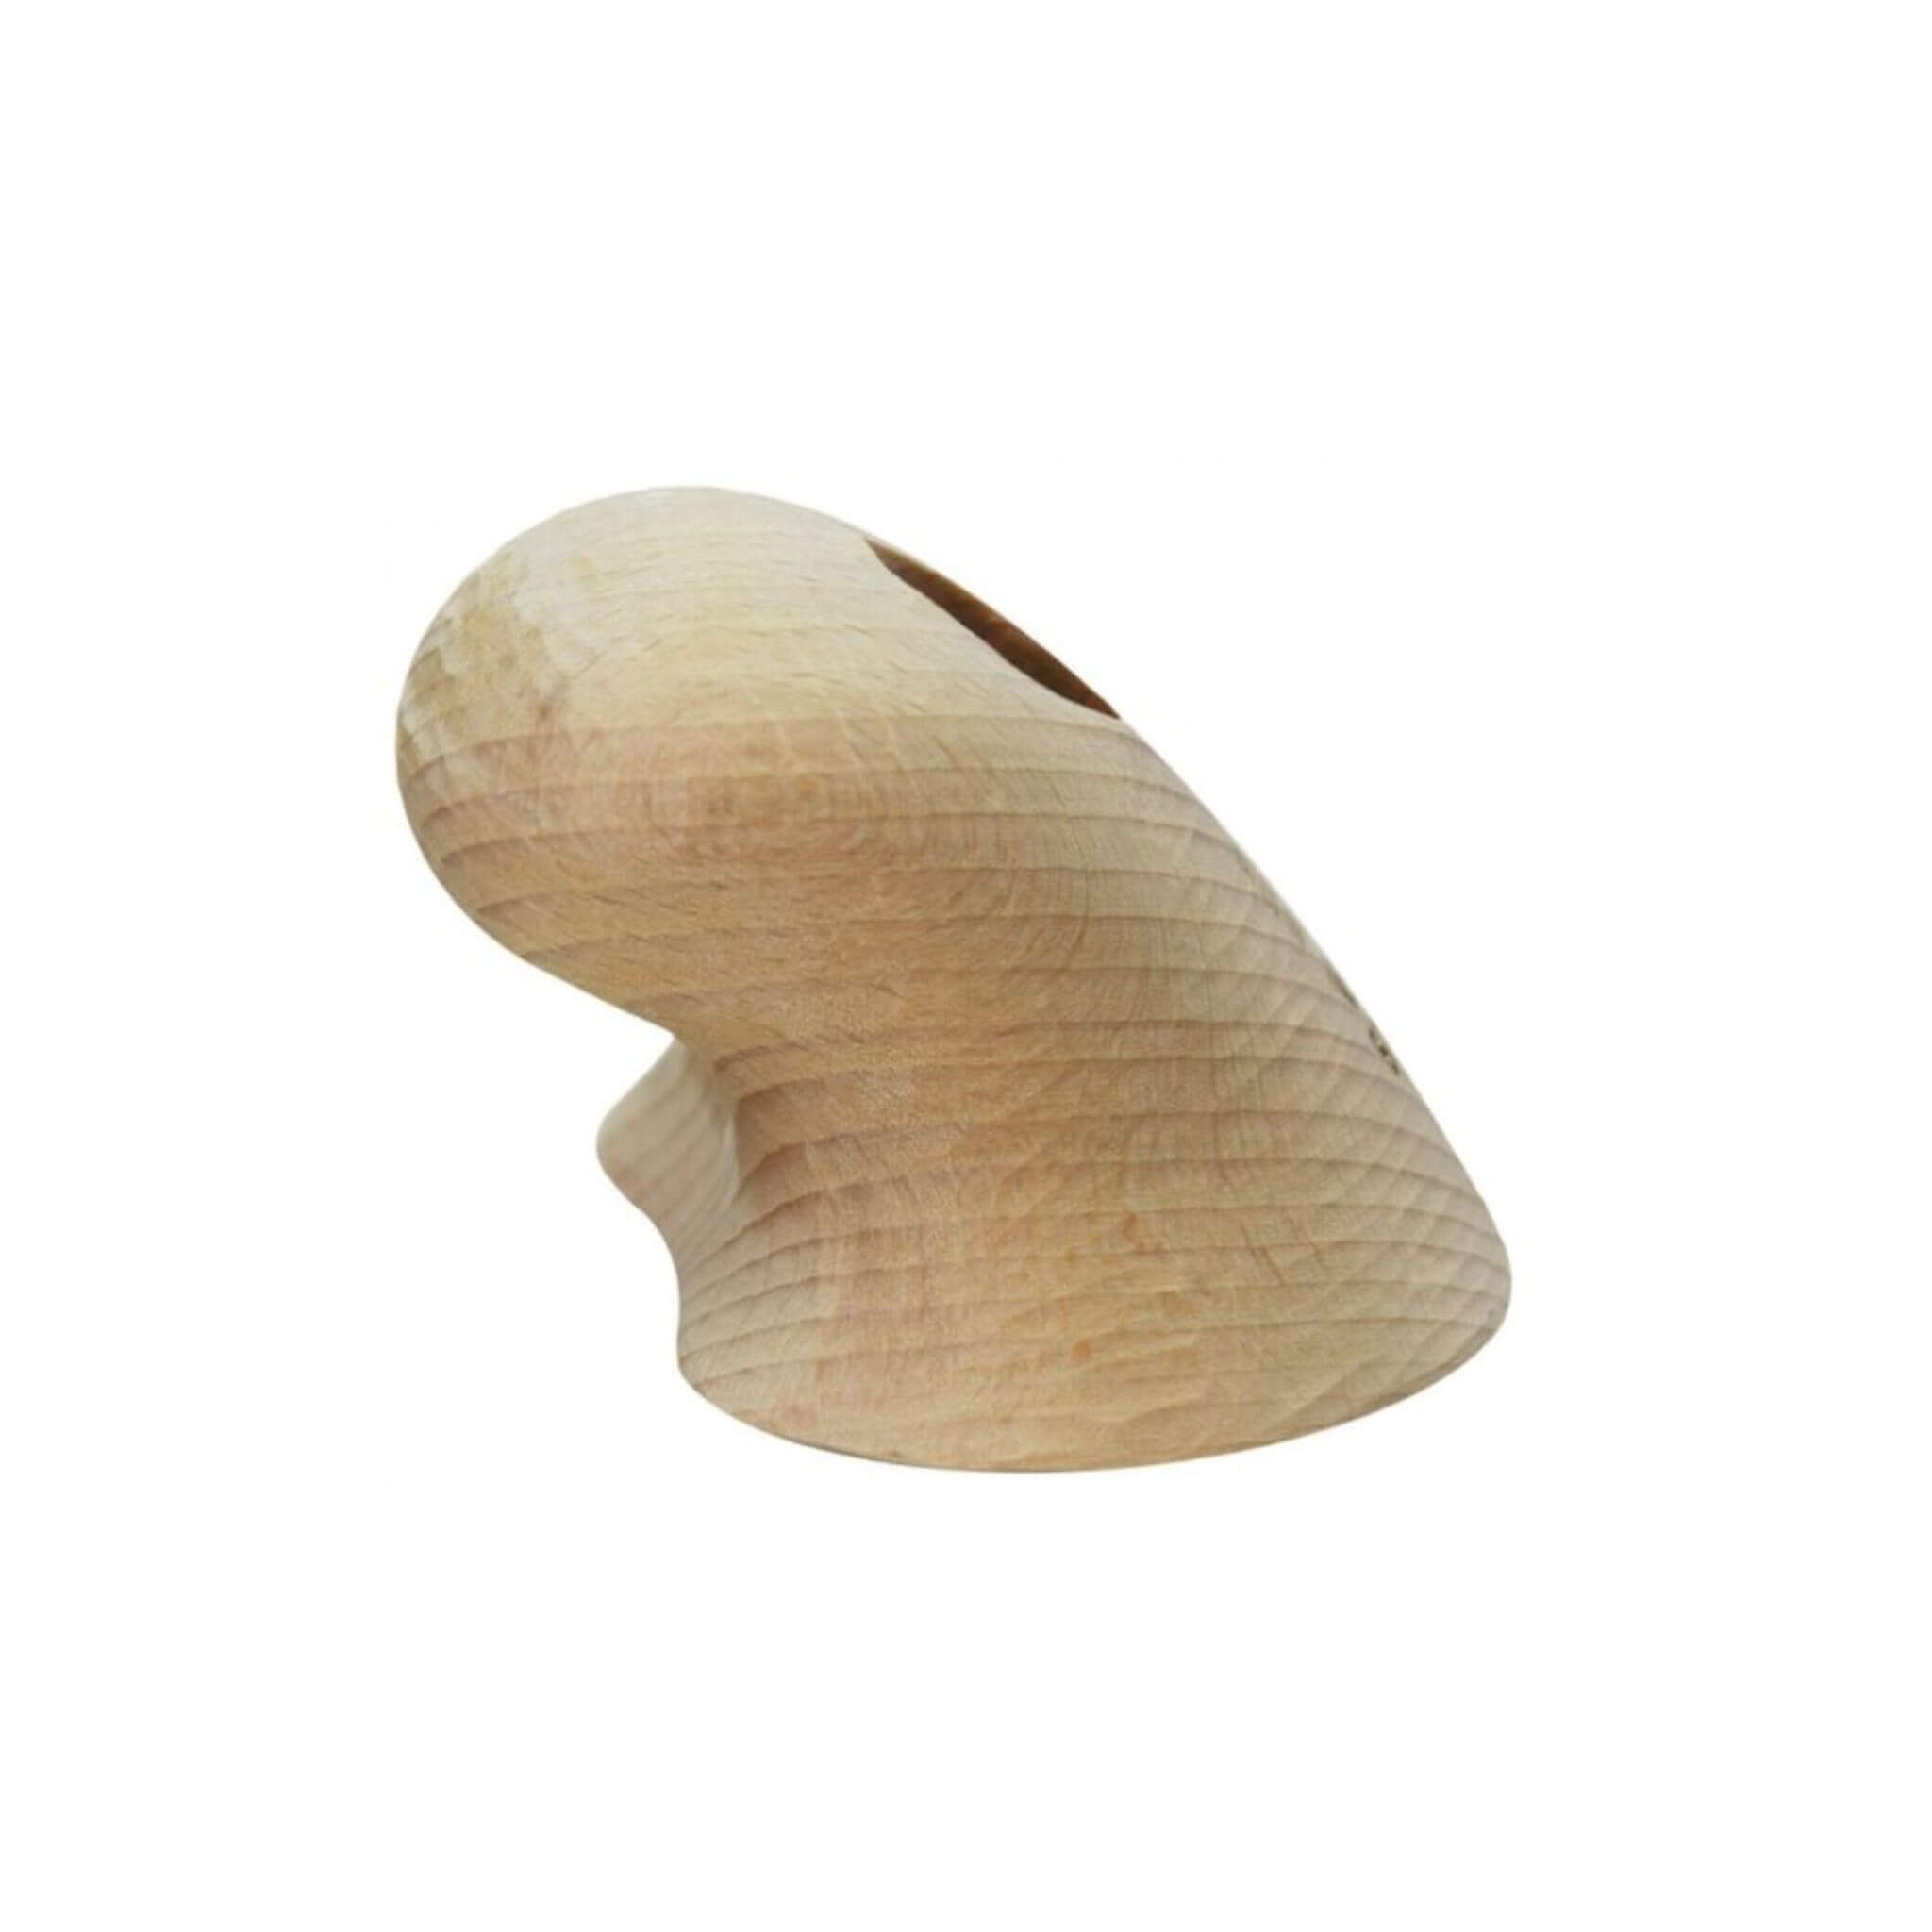 Wooden Climbing Holds From Euroholds in Different Shapes